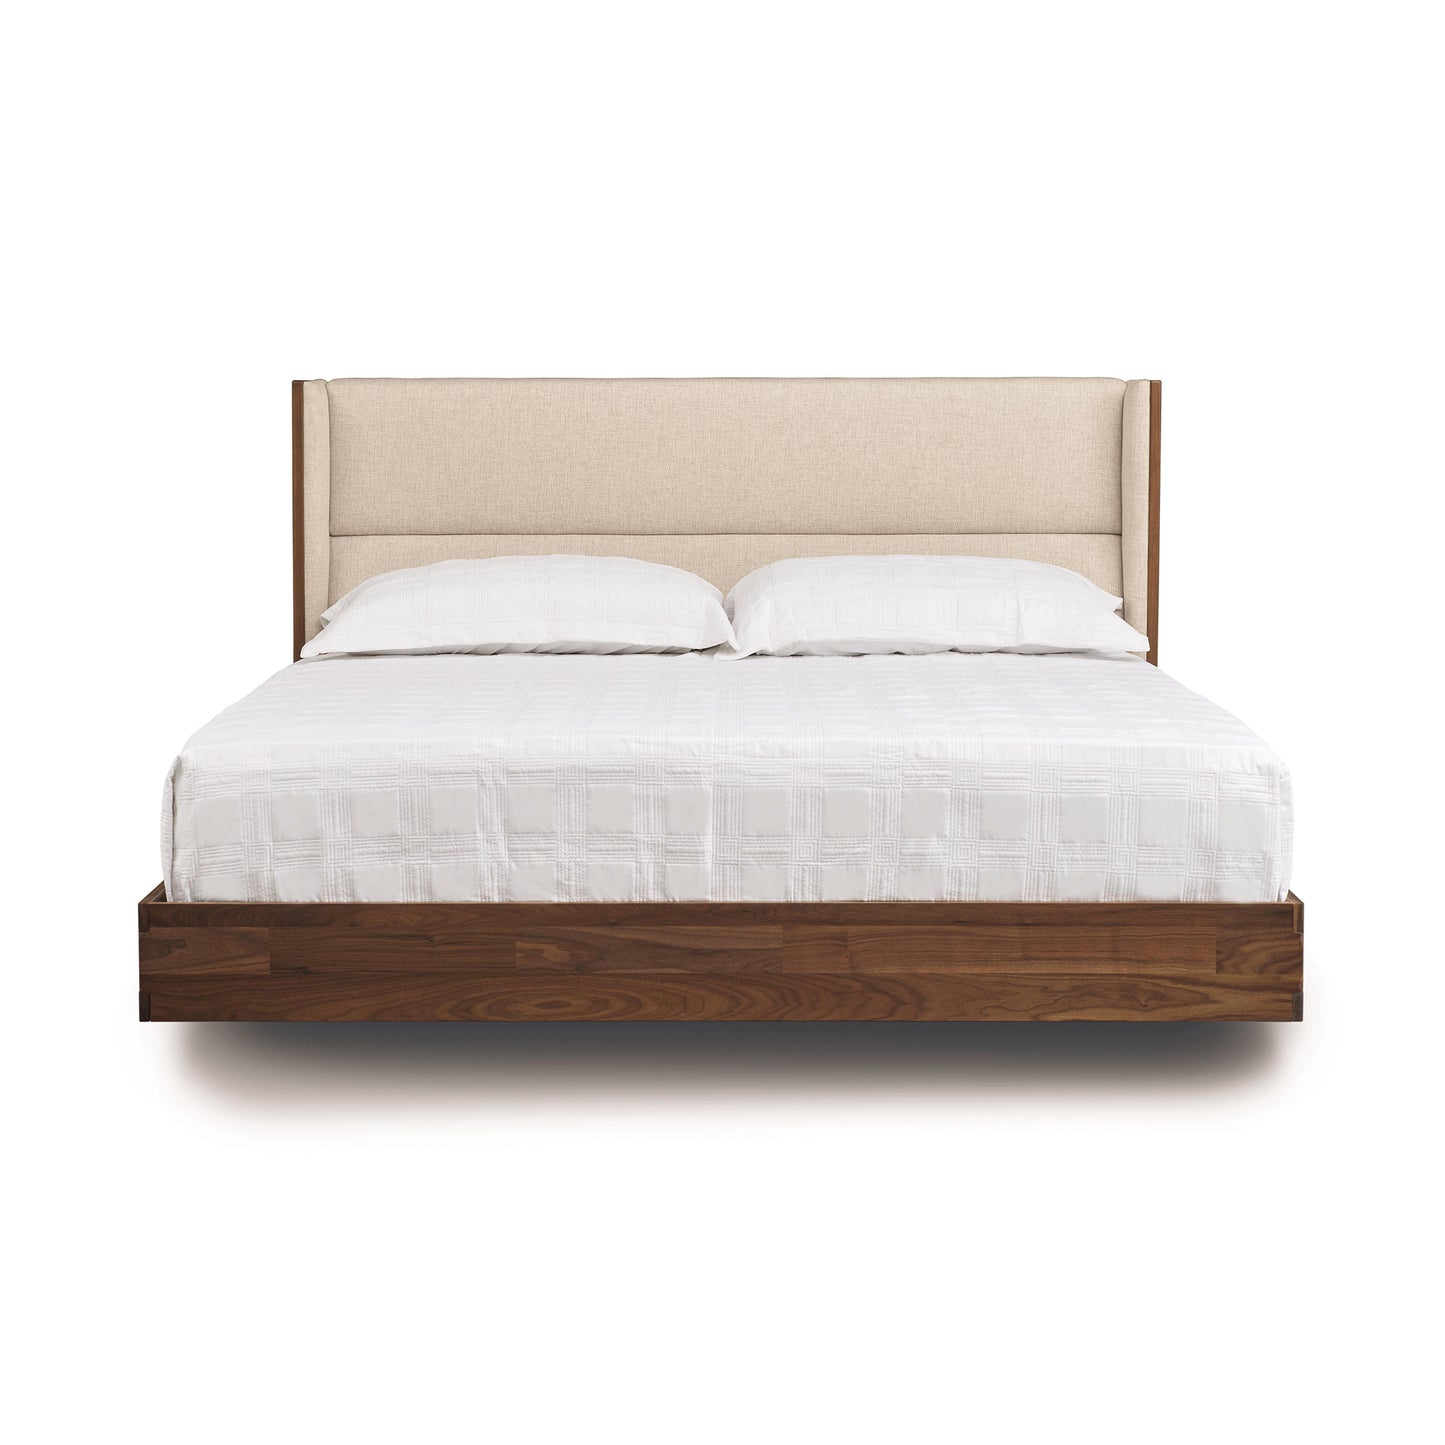 The Copeland Furniture Sloane Floating Bed features a wooden frame and an upholstered headboard.